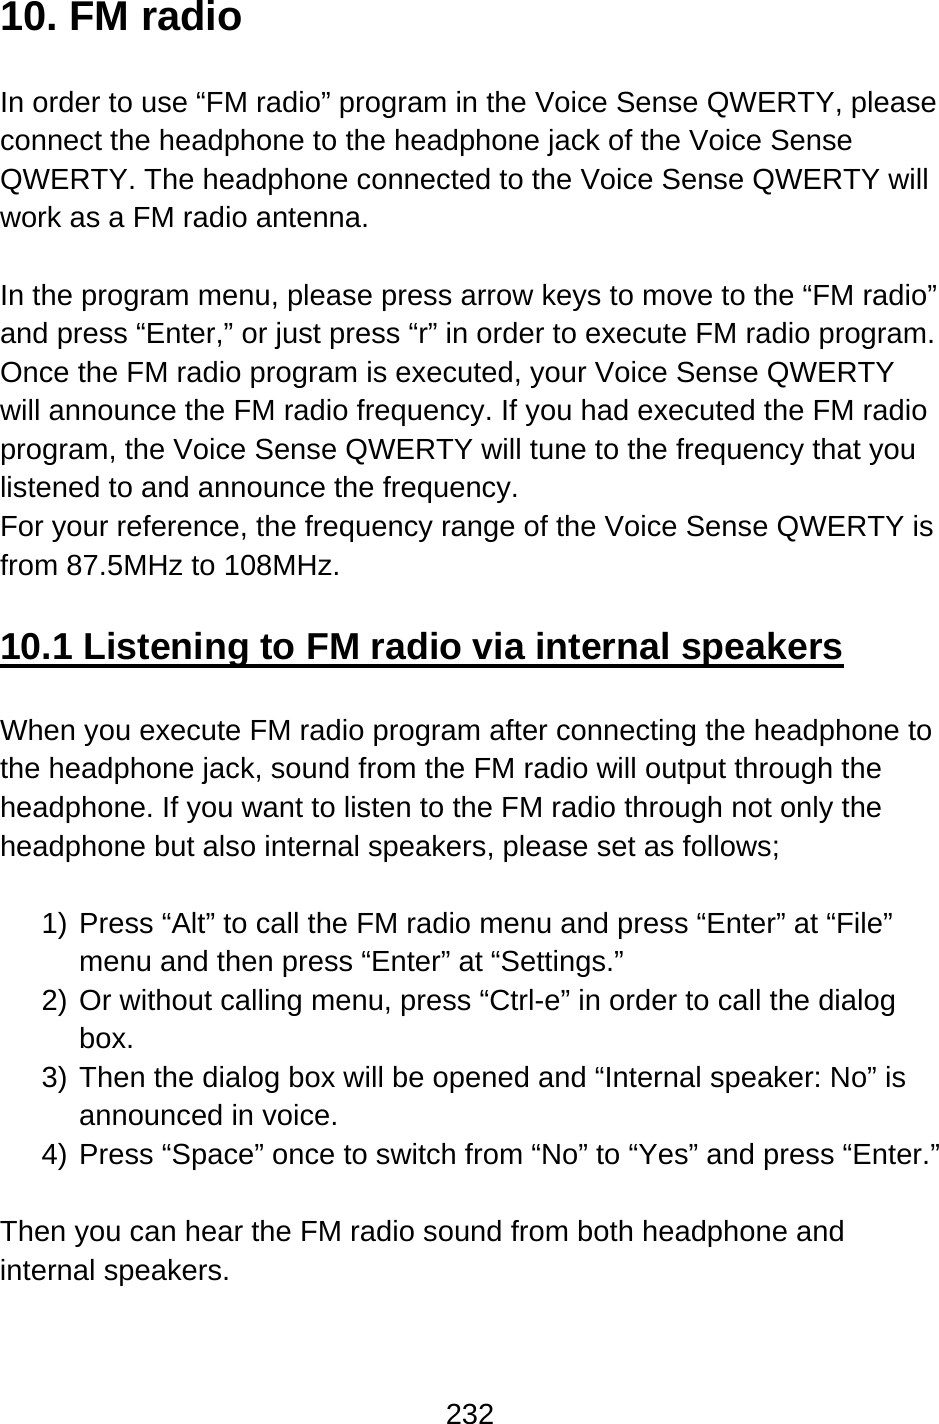 232  10. FM radio  In order to use “FM radio” program in the Voice Sense QWERTY, please connect the headphone to the headphone jack of the Voice Sense QWERTY. The headphone connected to the Voice Sense QWERTY will work as a FM radio antenna.  In the program menu, please press arrow keys to move to the “FM radio” and press “Enter,” or just press “r” in order to execute FM radio program. Once the FM radio program is executed, your Voice Sense QWERTY will announce the FM radio frequency. If you had executed the FM radio program, the Voice Sense QWERTY will tune to the frequency that you listened to and announce the frequency.   For your reference, the frequency range of the Voice Sense QWERTY is from 87.5MHz to 108MHz.  10.1 Listening to FM radio via internal speakers  When you execute FM radio program after connecting the headphone to the headphone jack, sound from the FM radio will output through the headphone. If you want to listen to the FM radio through not only the headphone but also internal speakers, please set as follows;  1) Press “Alt” to call the FM radio menu and press “Enter” at “File” menu and then press “Enter” at “Settings.” 2) Or without calling menu, press “Ctrl-e” in order to call the dialog box. 3) Then the dialog box will be opened and “Internal speaker: No” is announced in voice. 4) Press “Space” once to switch from “No” to “Yes” and press “Enter.”  Then you can hear the FM radio sound from both headphone and internal speakers. 